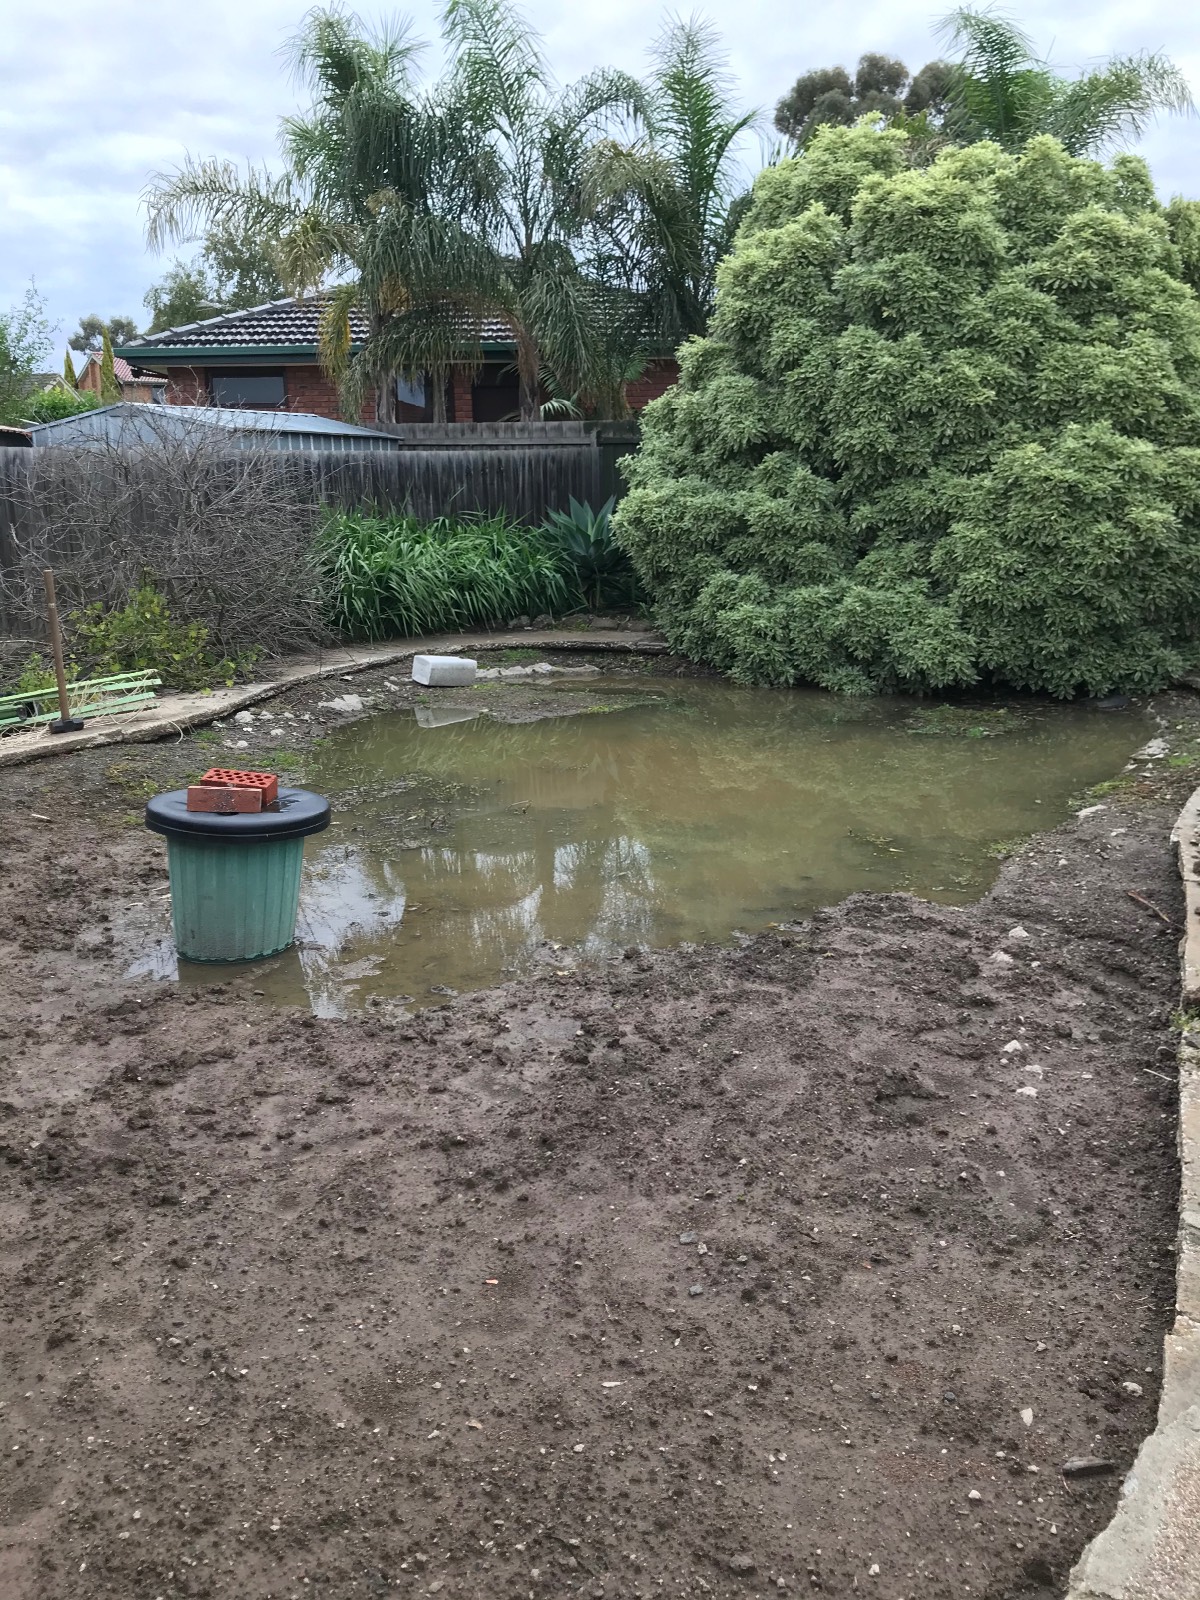 Inground pool already filled in - problems